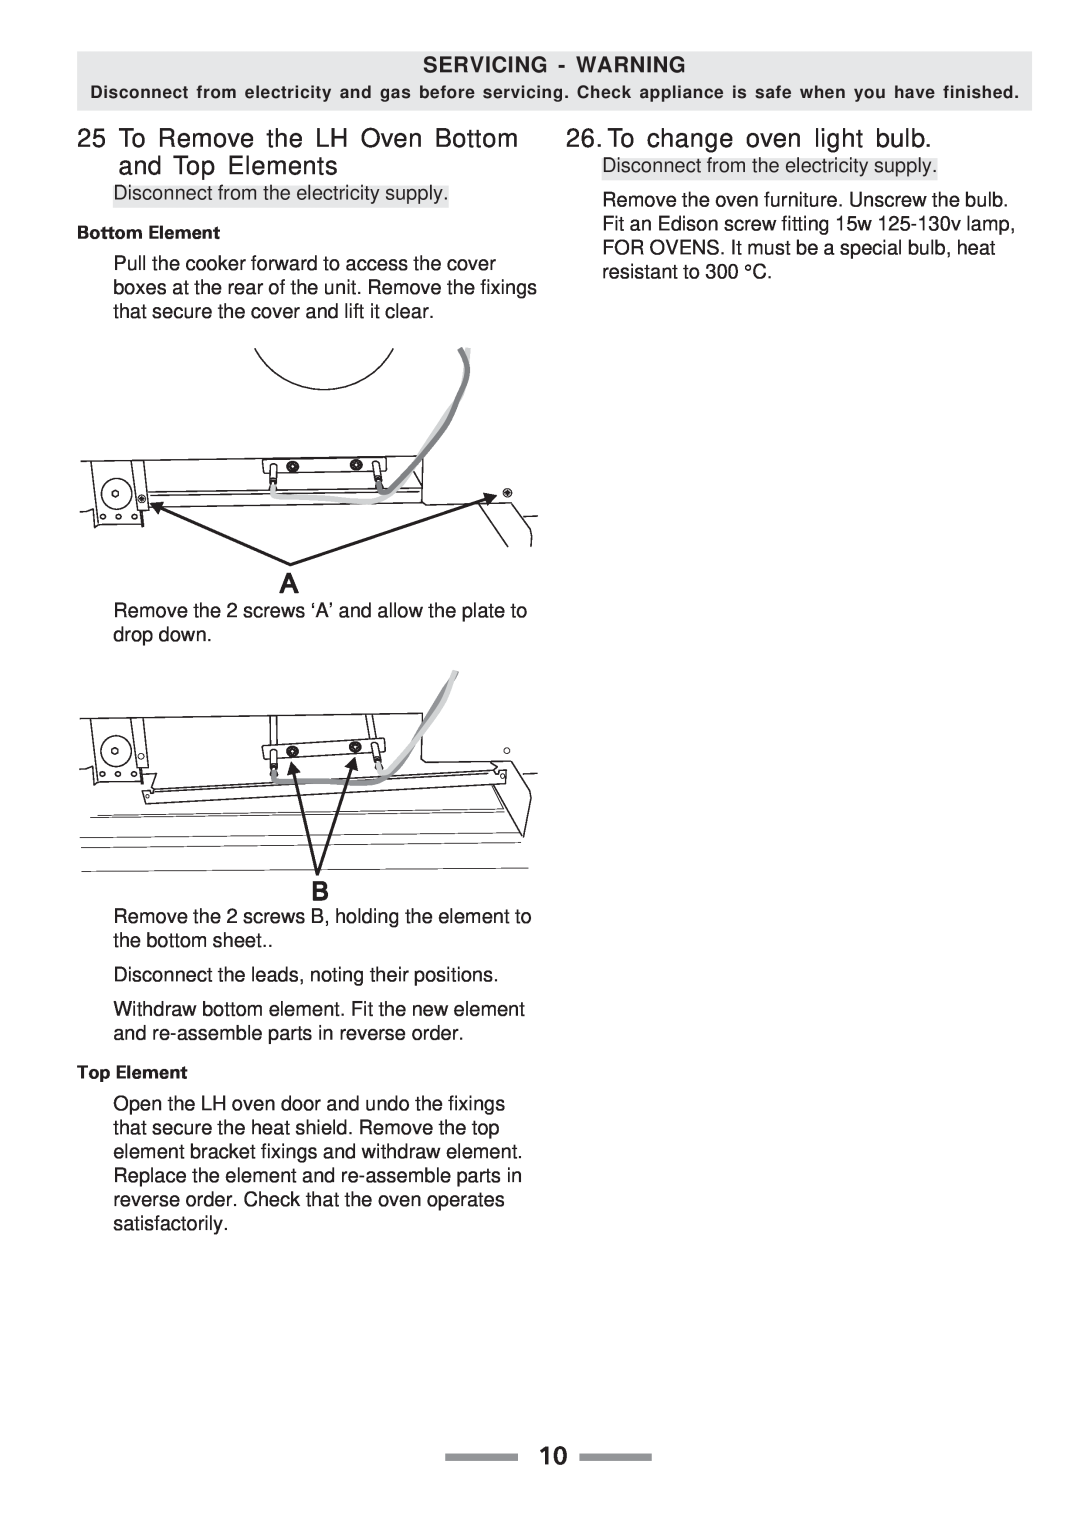 Aga Ranges F104010-01 manual To Remove the LH Oven Bottom and Top Elements, To change oven light bulb 